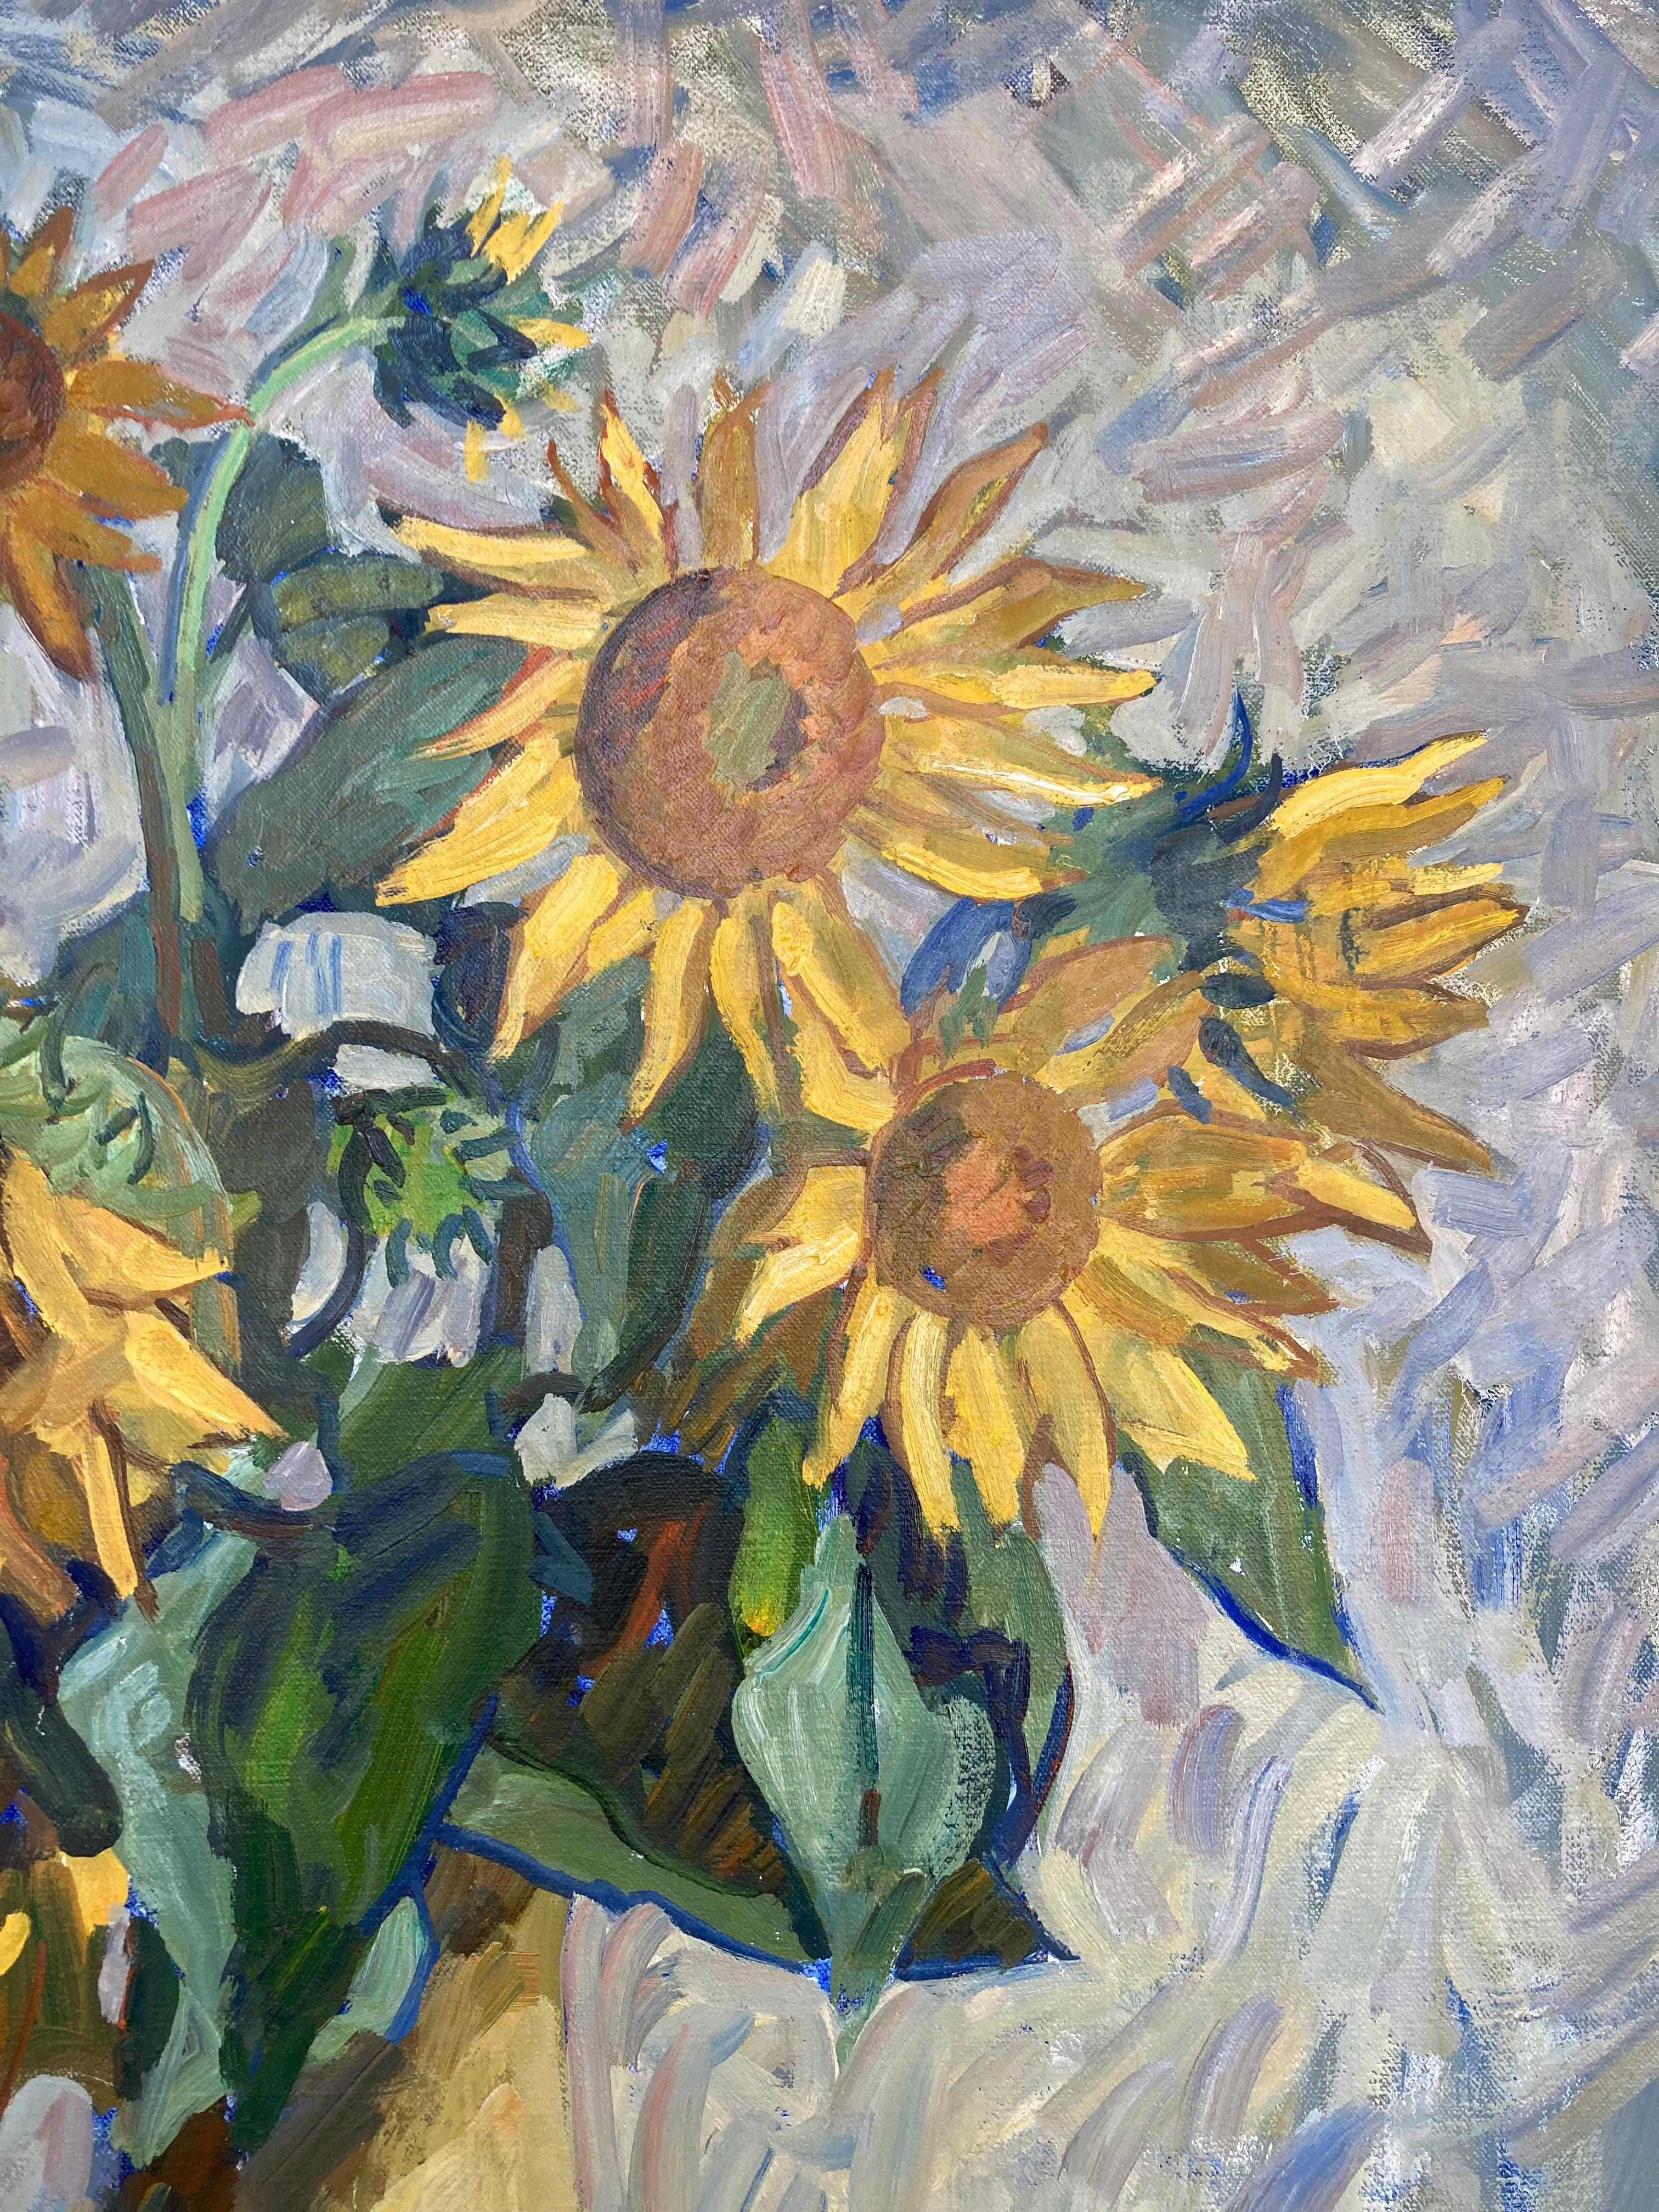 An oil painting of bright yellow sunflowers standing tall in a slender vase, against a light blue backdrop. 

Framed Dimensions: 39.5 x 31.5 inches

Inspired by the French Impressionists, Ben Fenske’s timeless, vividly colored paintings are